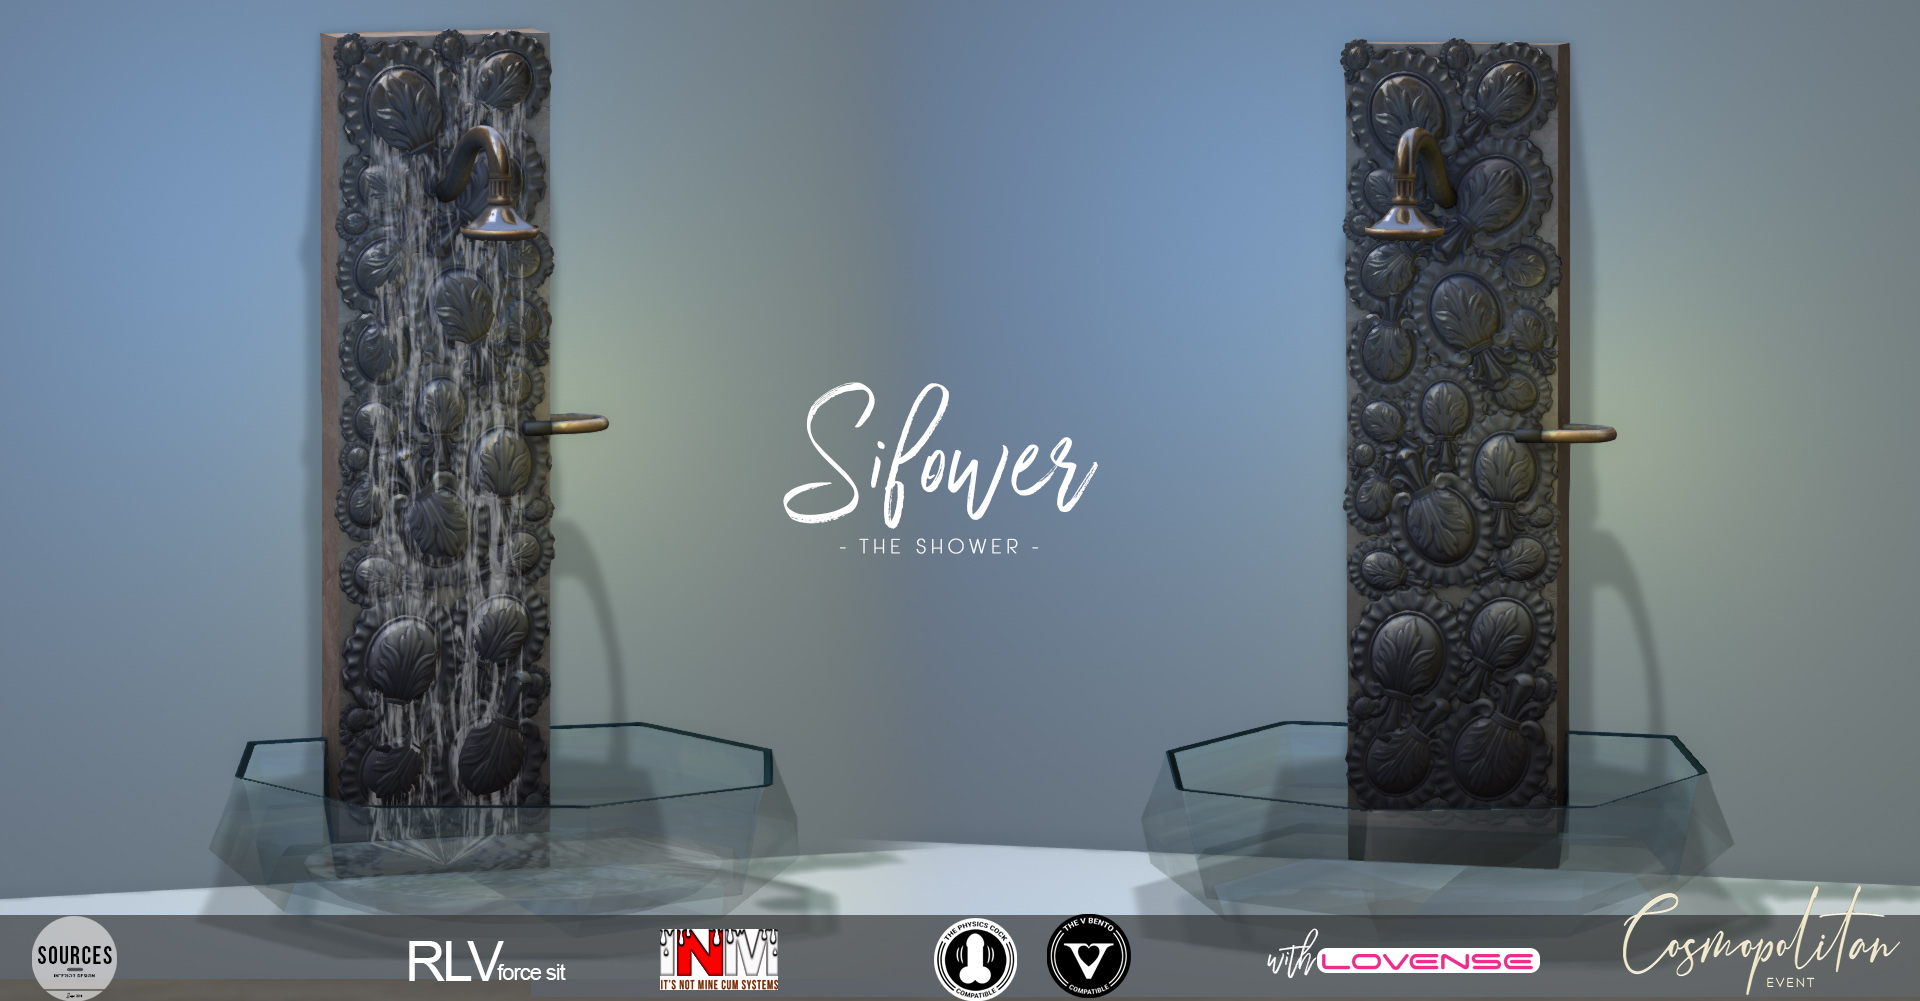 SOURCES – Sifower Shower